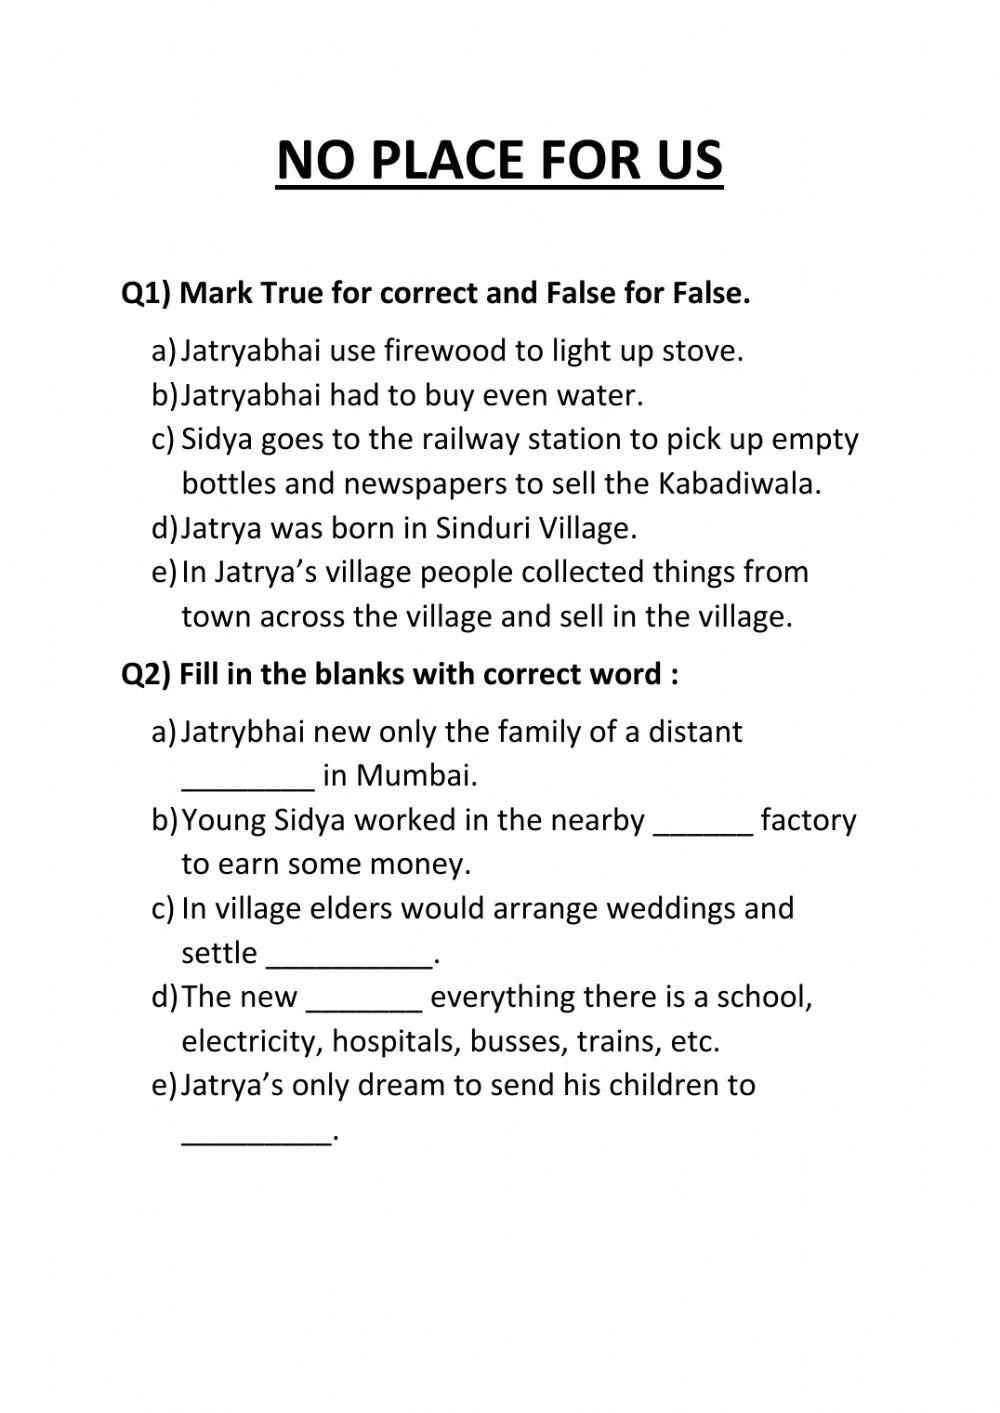 No place for us - worksheet